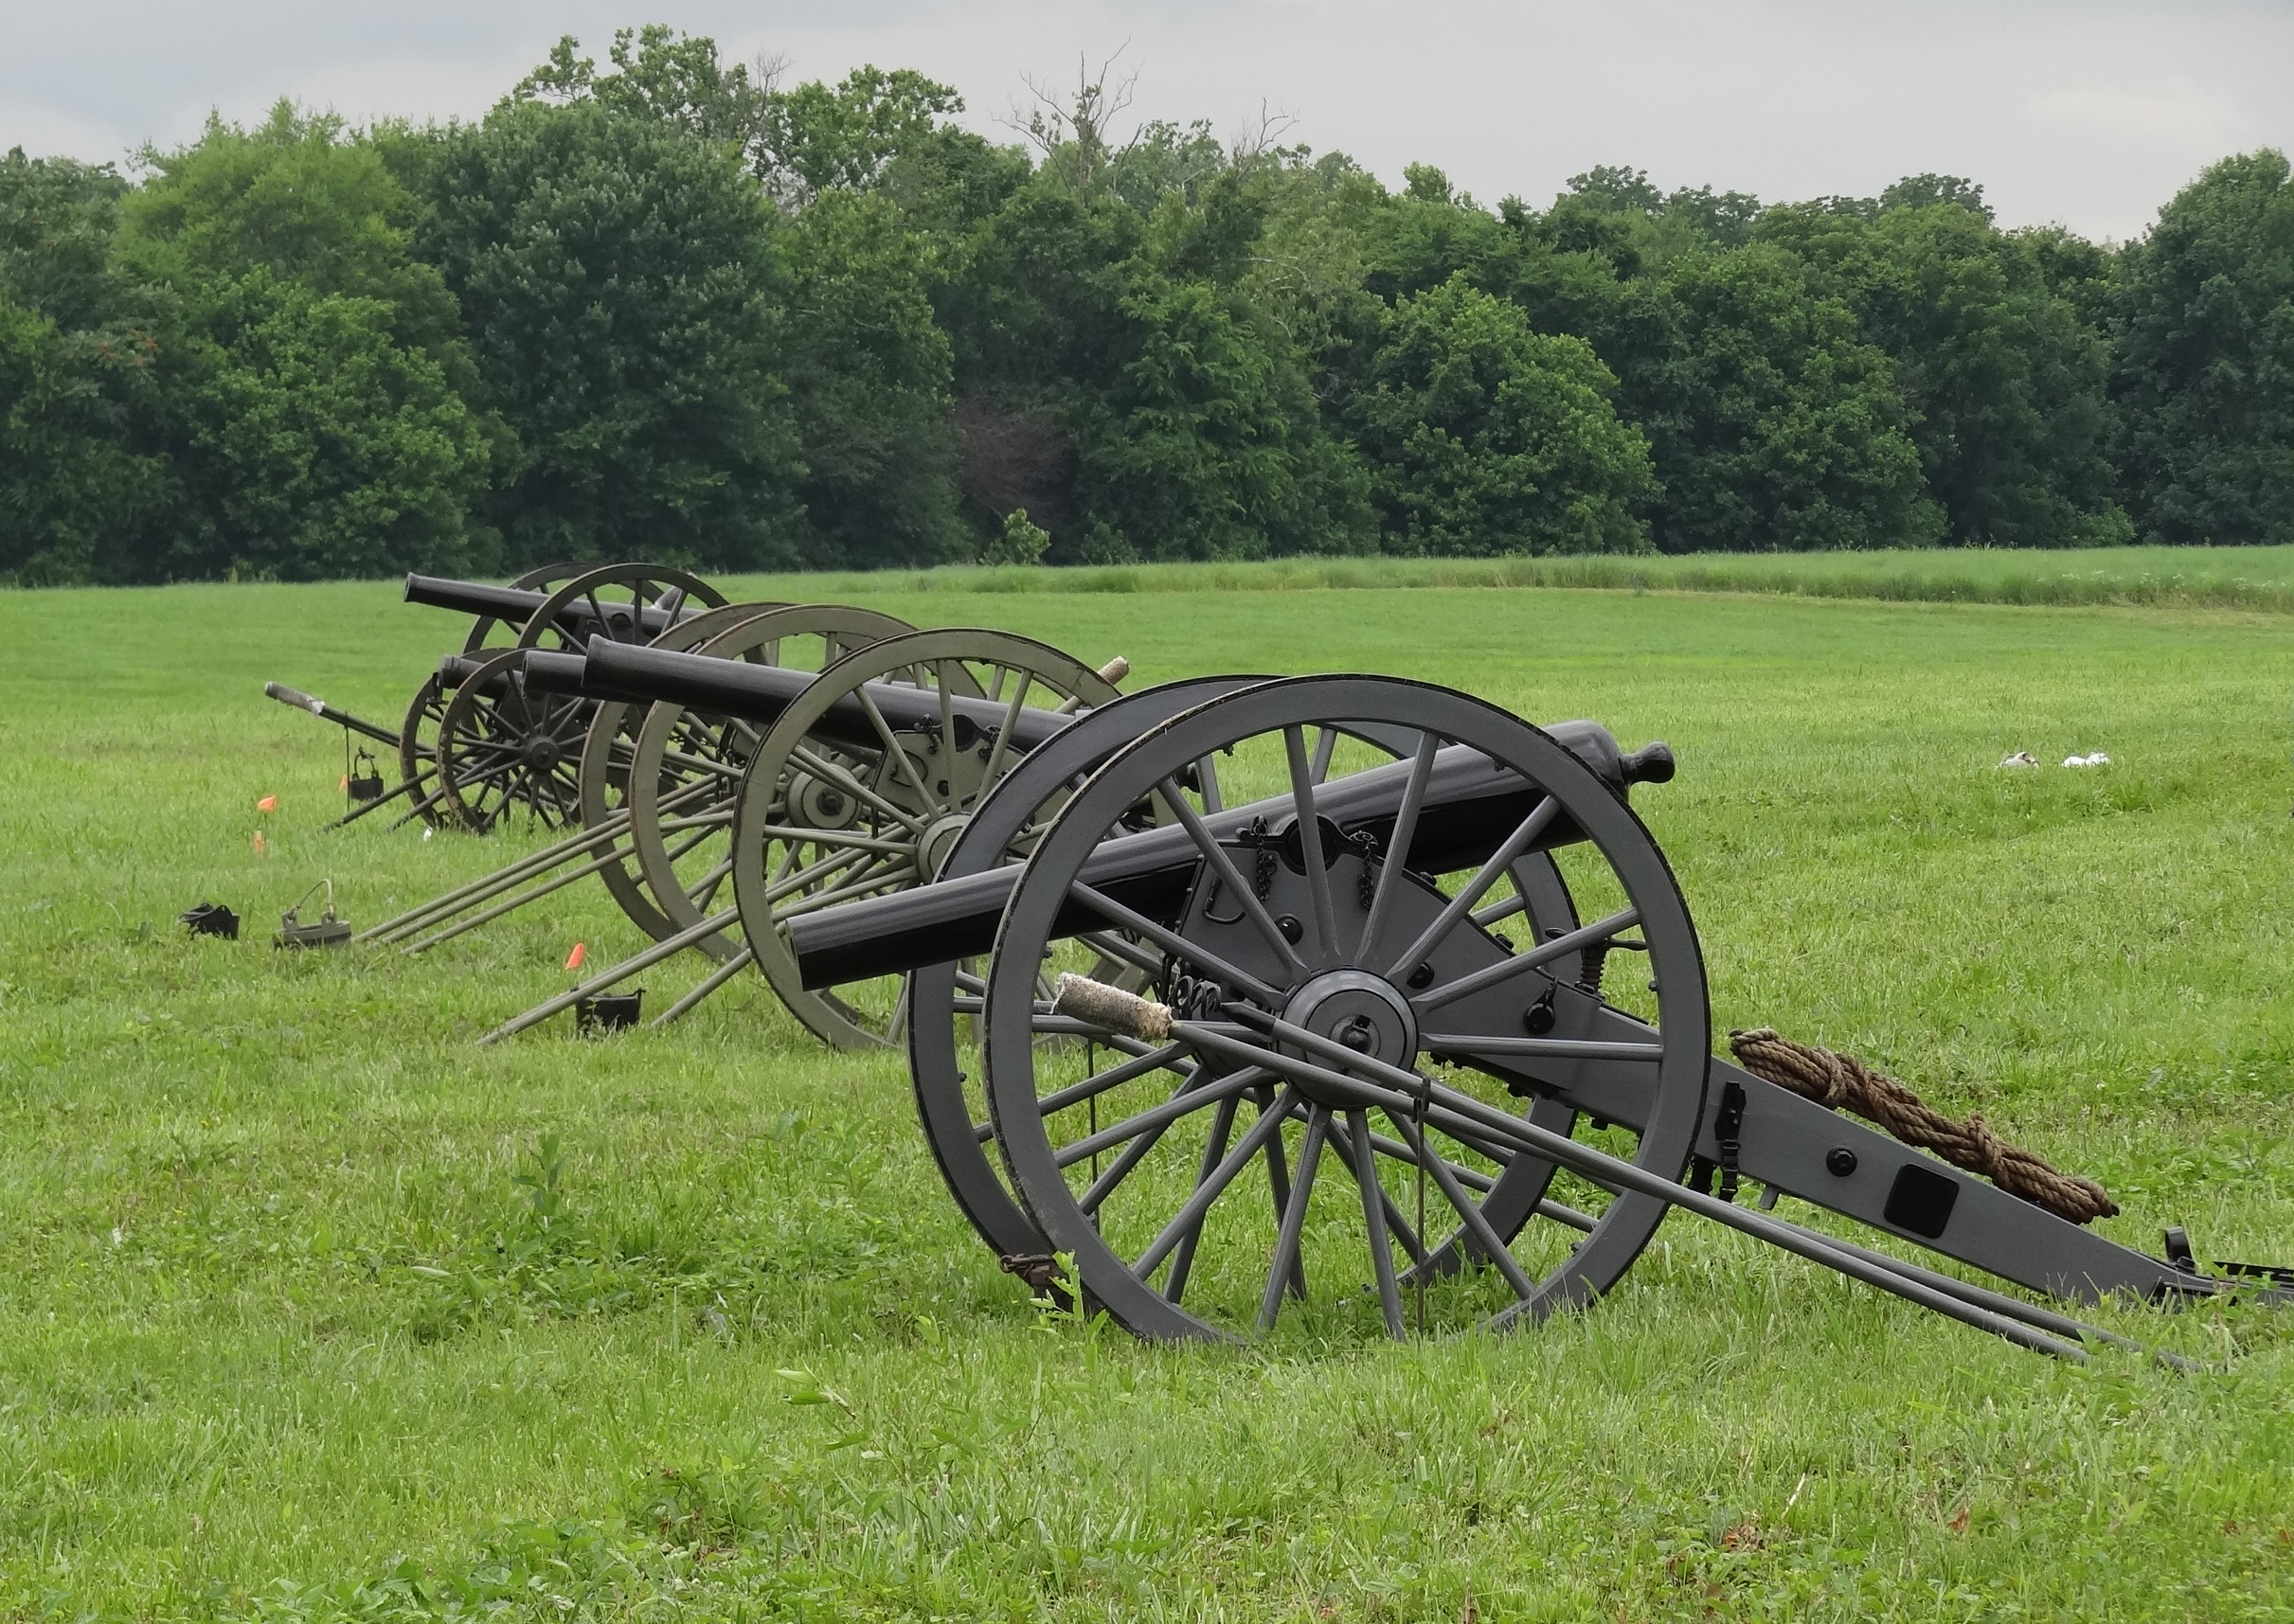 Cannons at Staunton River Battlefield during commemorative event